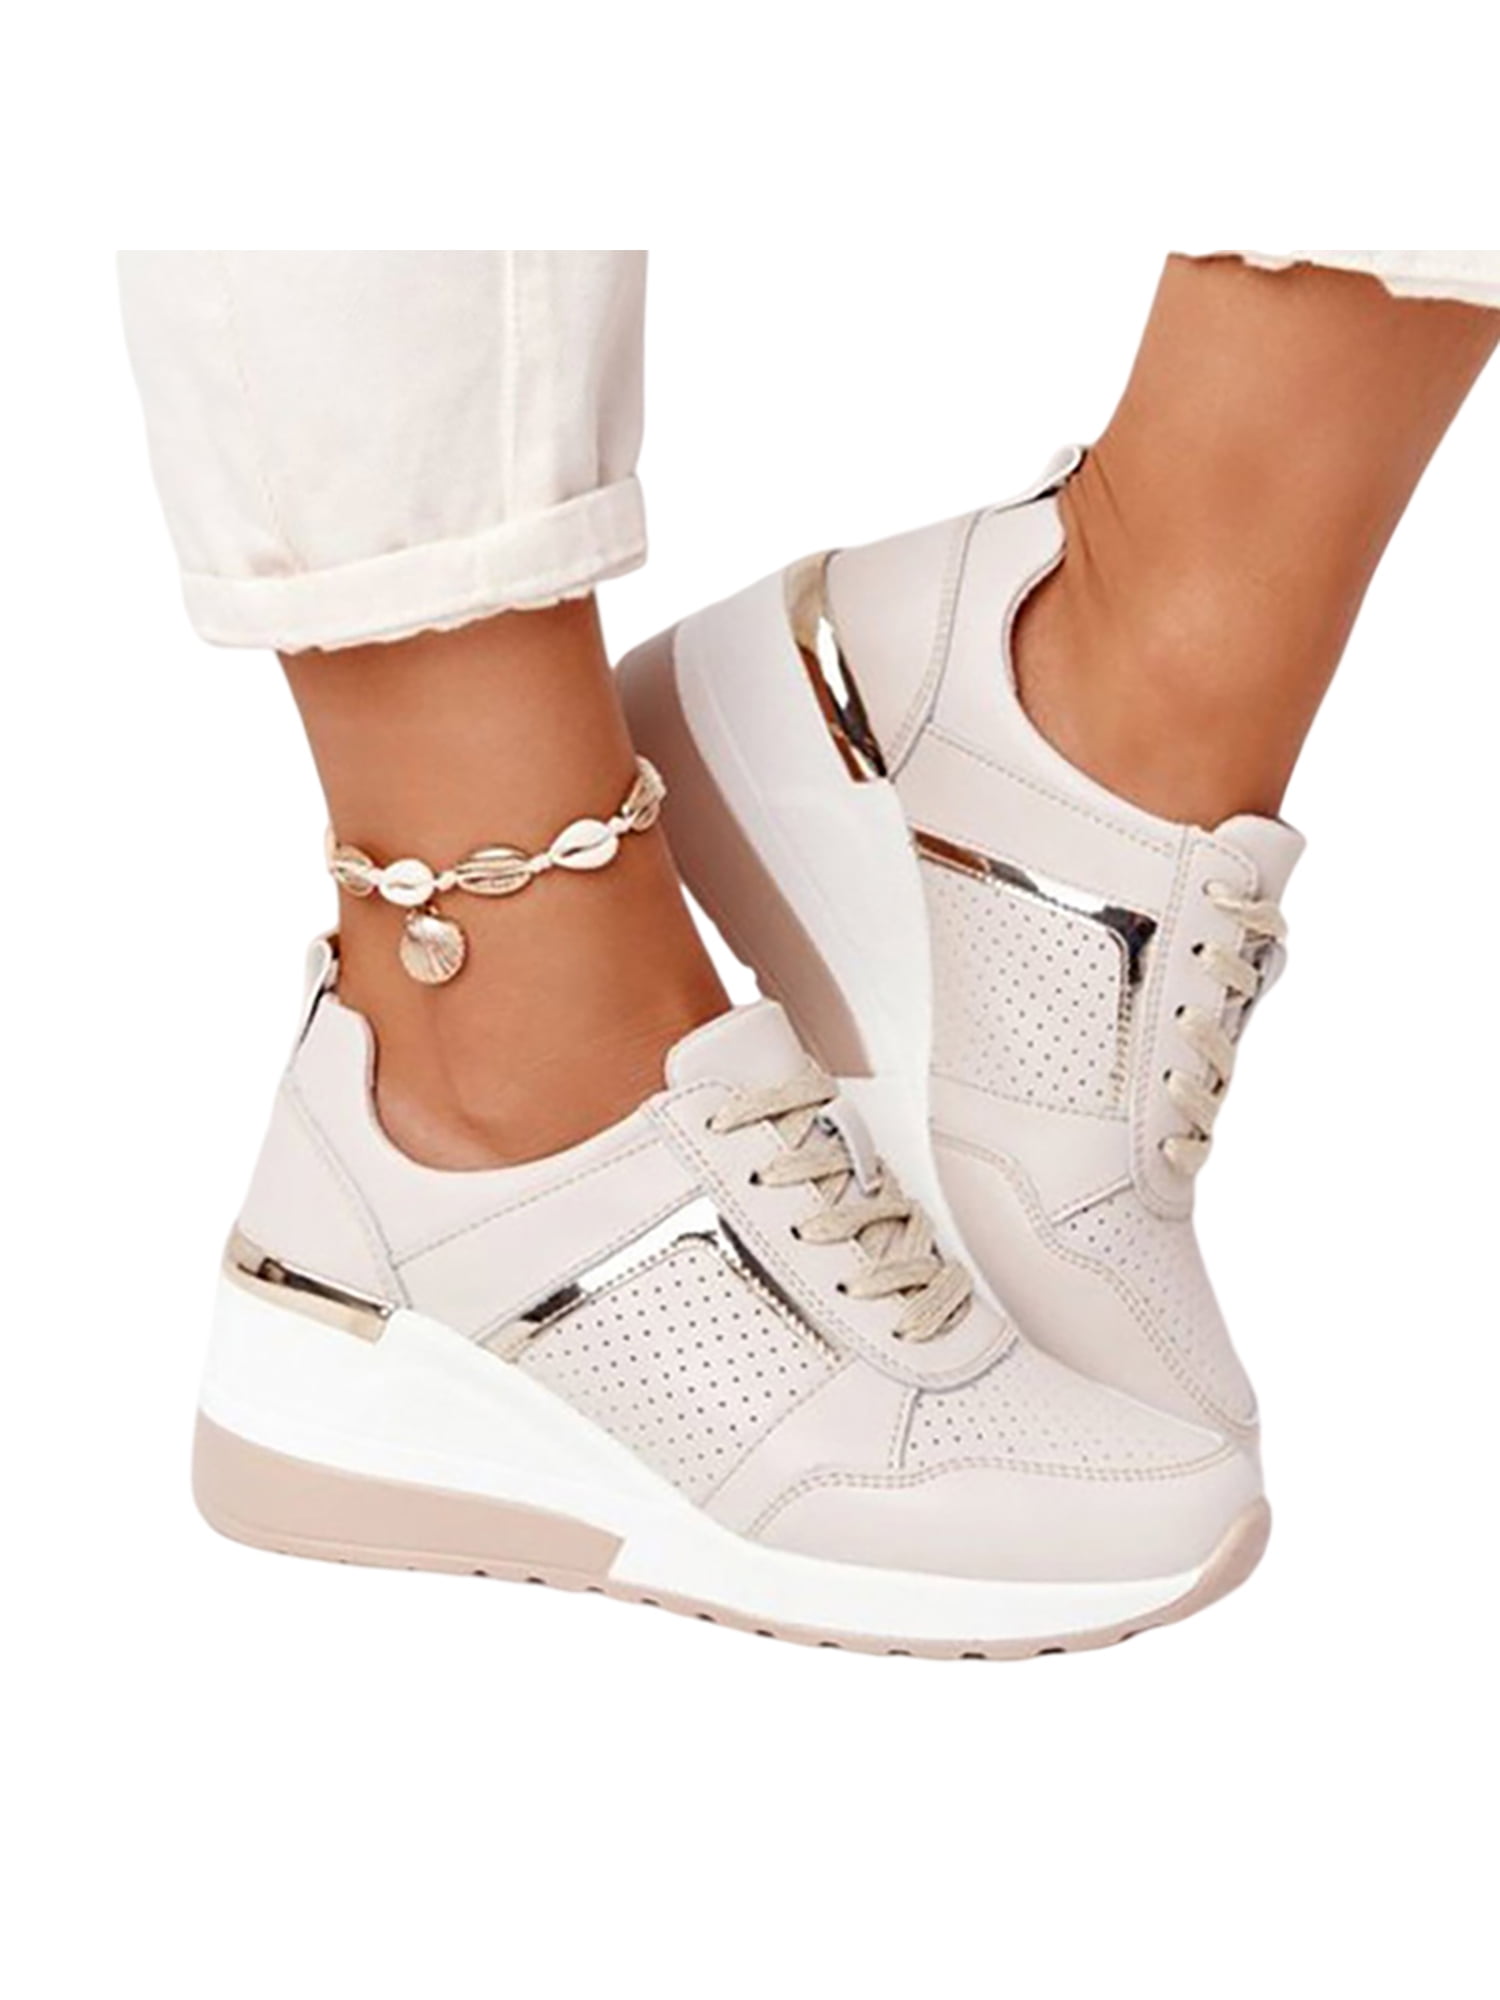 Women Mesh Jogging Walking Breathable Wedge Sneakers Creeper Shoes Lace Up Size